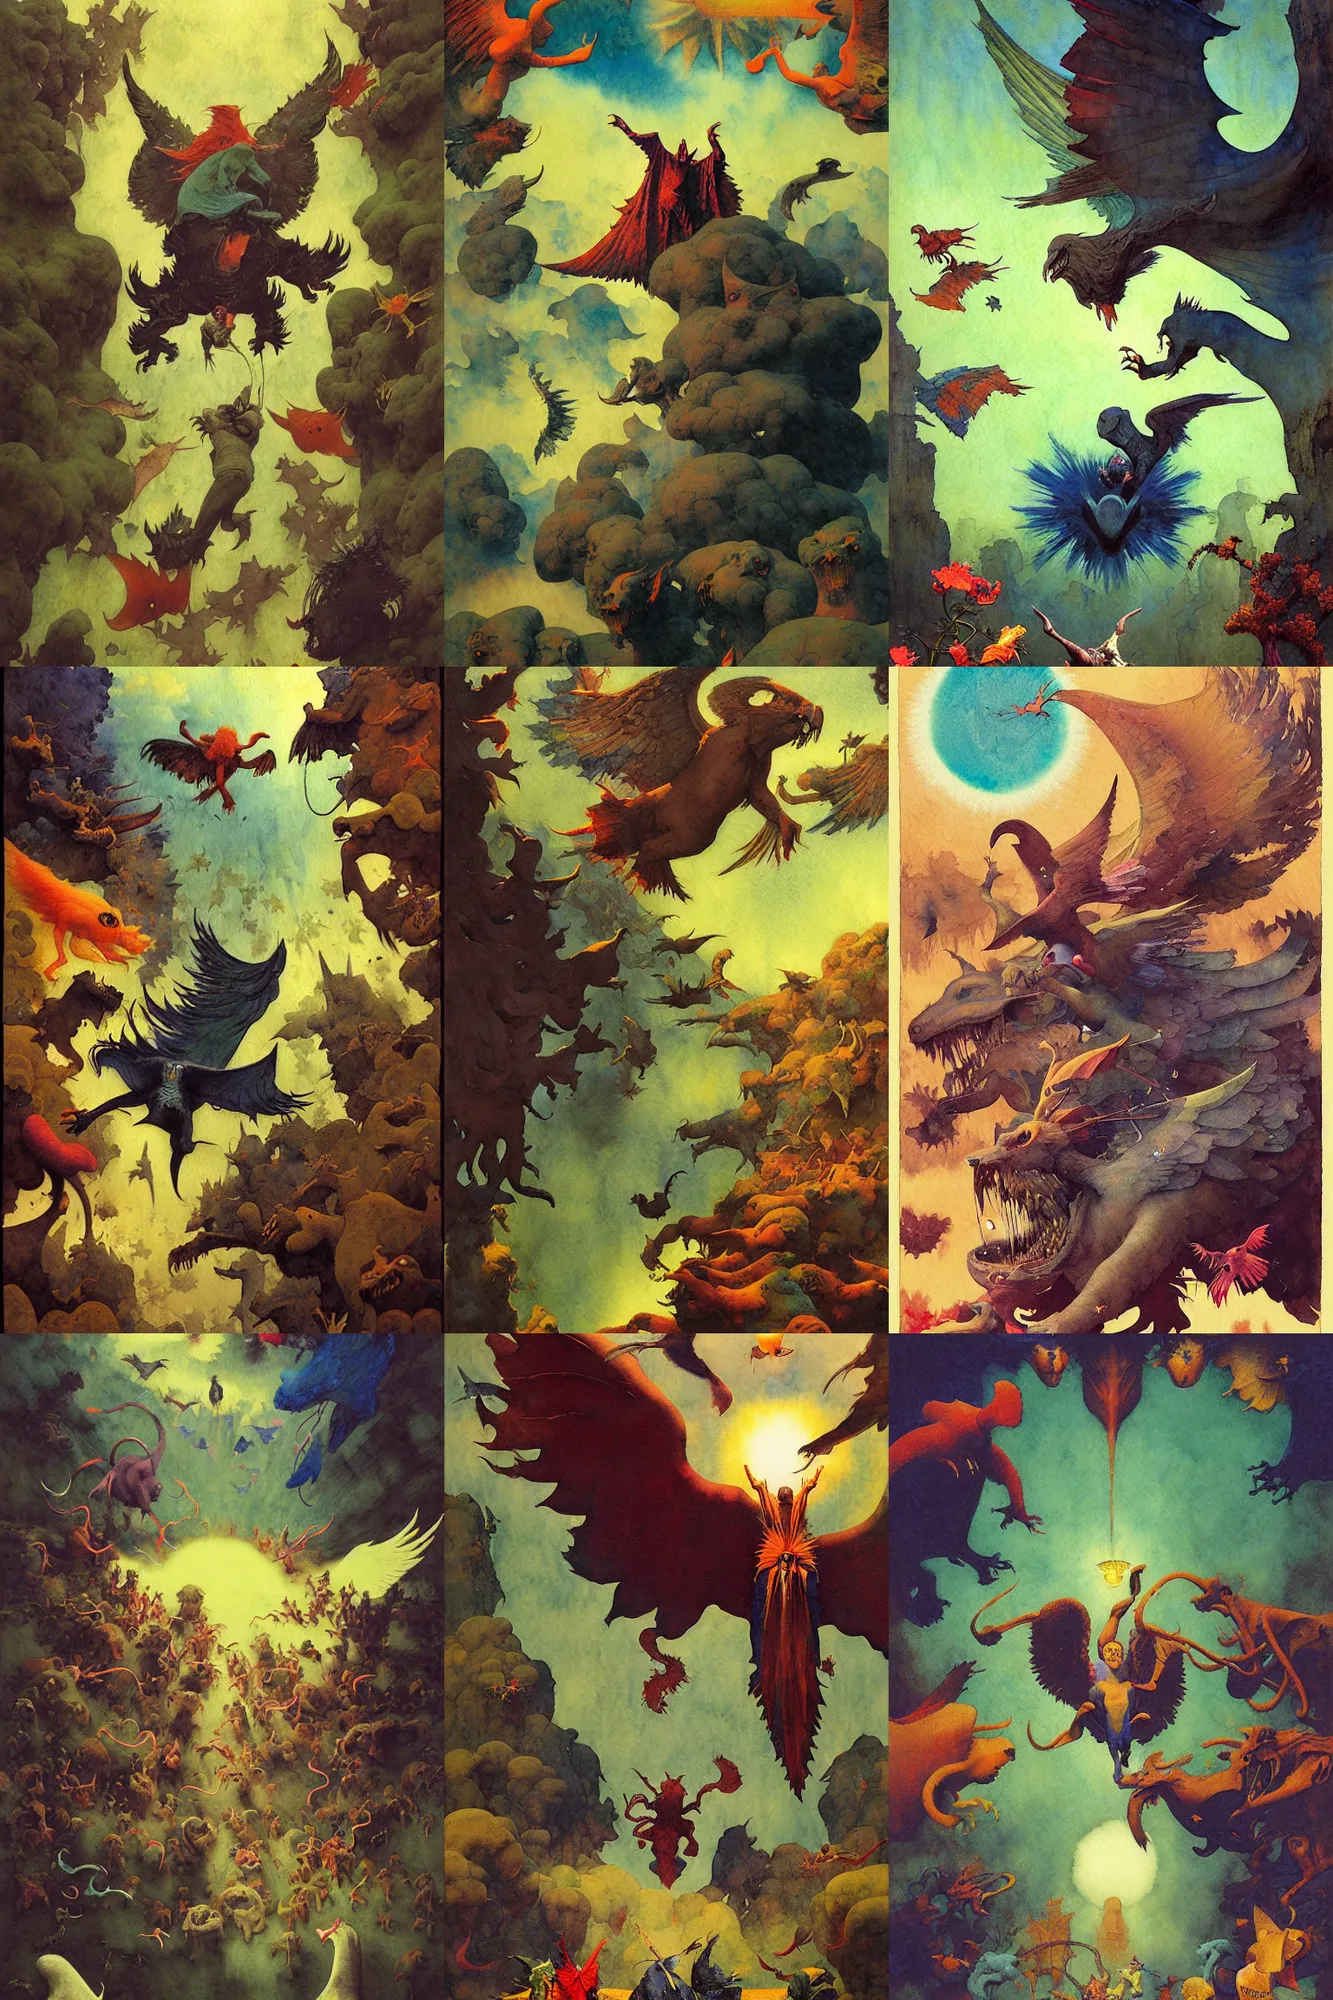 Prompt: dixit card, fly, swoop, catch, hunt, prey, angel, devil, horror, terror, theme park, cryptid, intricate, amazing composition, colorful watercolor, by ruan jia, by maxfield parrish, by shaun tan, by nc wyeth, by michael whelan, by escher, illustration, volumetric, bloom, sun puddle